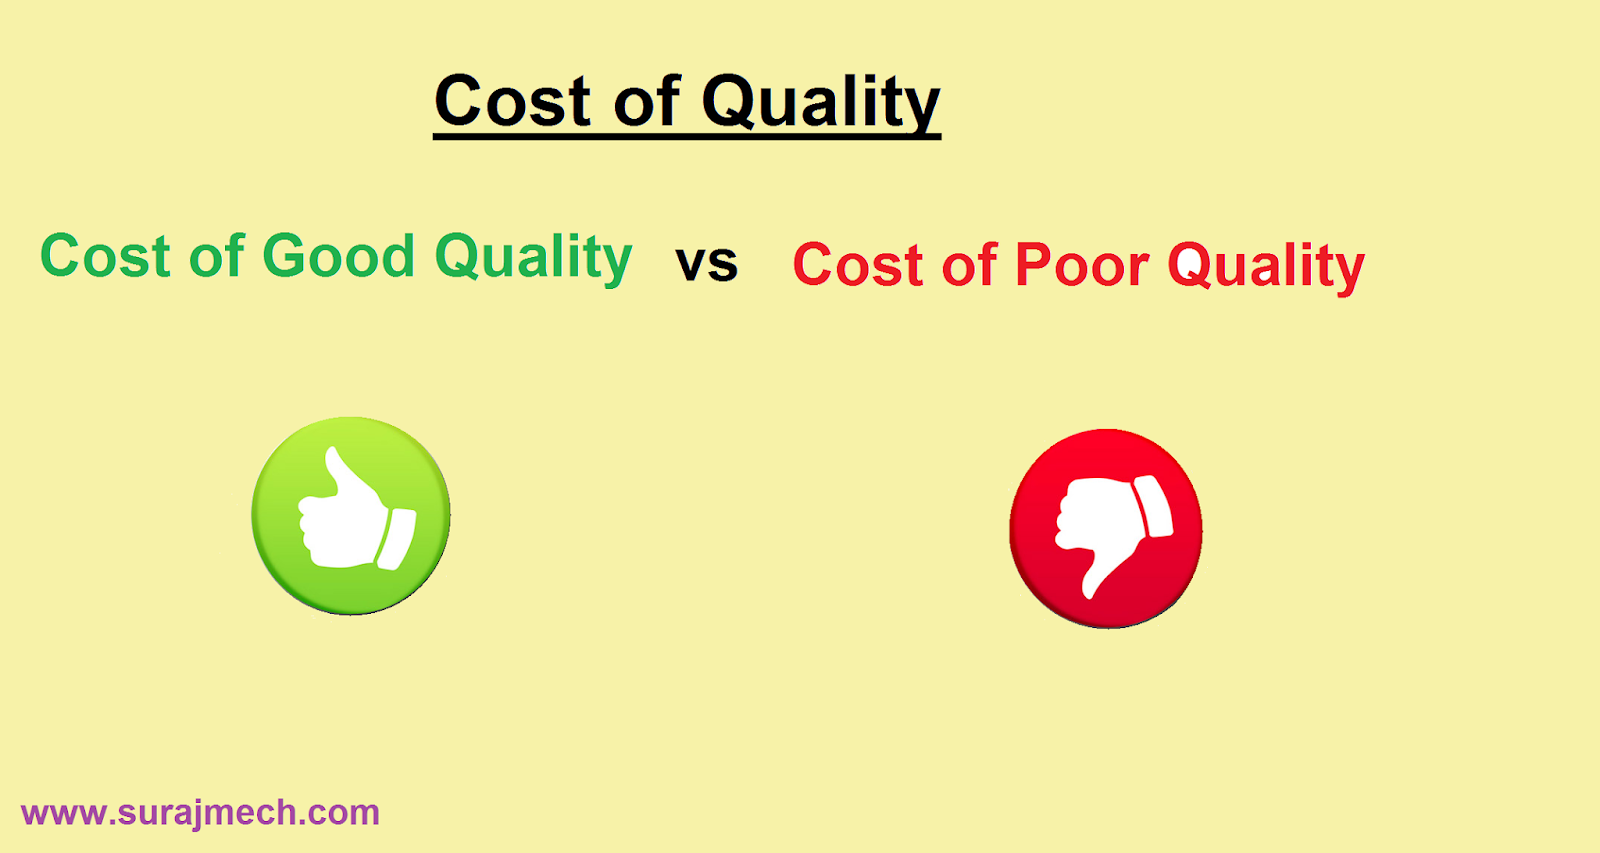 Cost of Quality vs Cost of Poor Quality